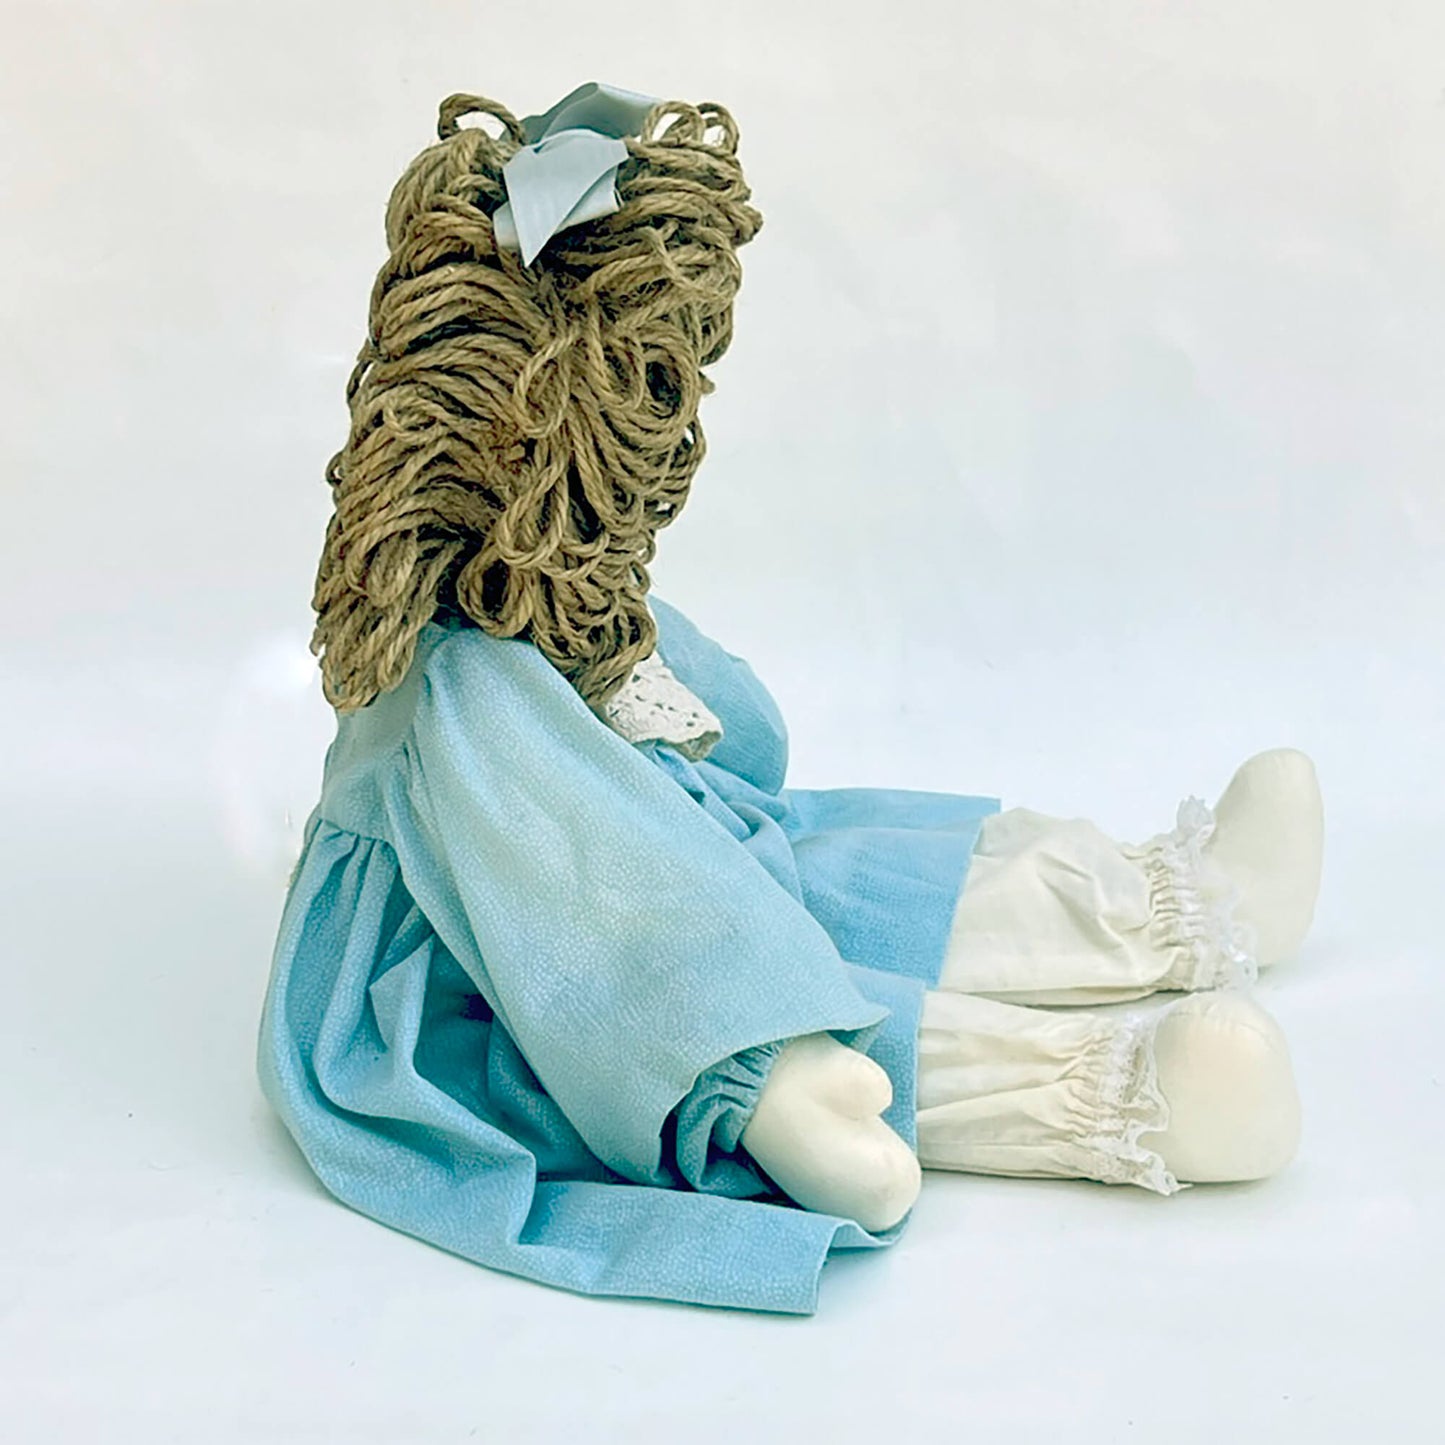 Ragamuffins-Doll-by-C-Buehner-Hand-made-Cloth-Doll_Side-View